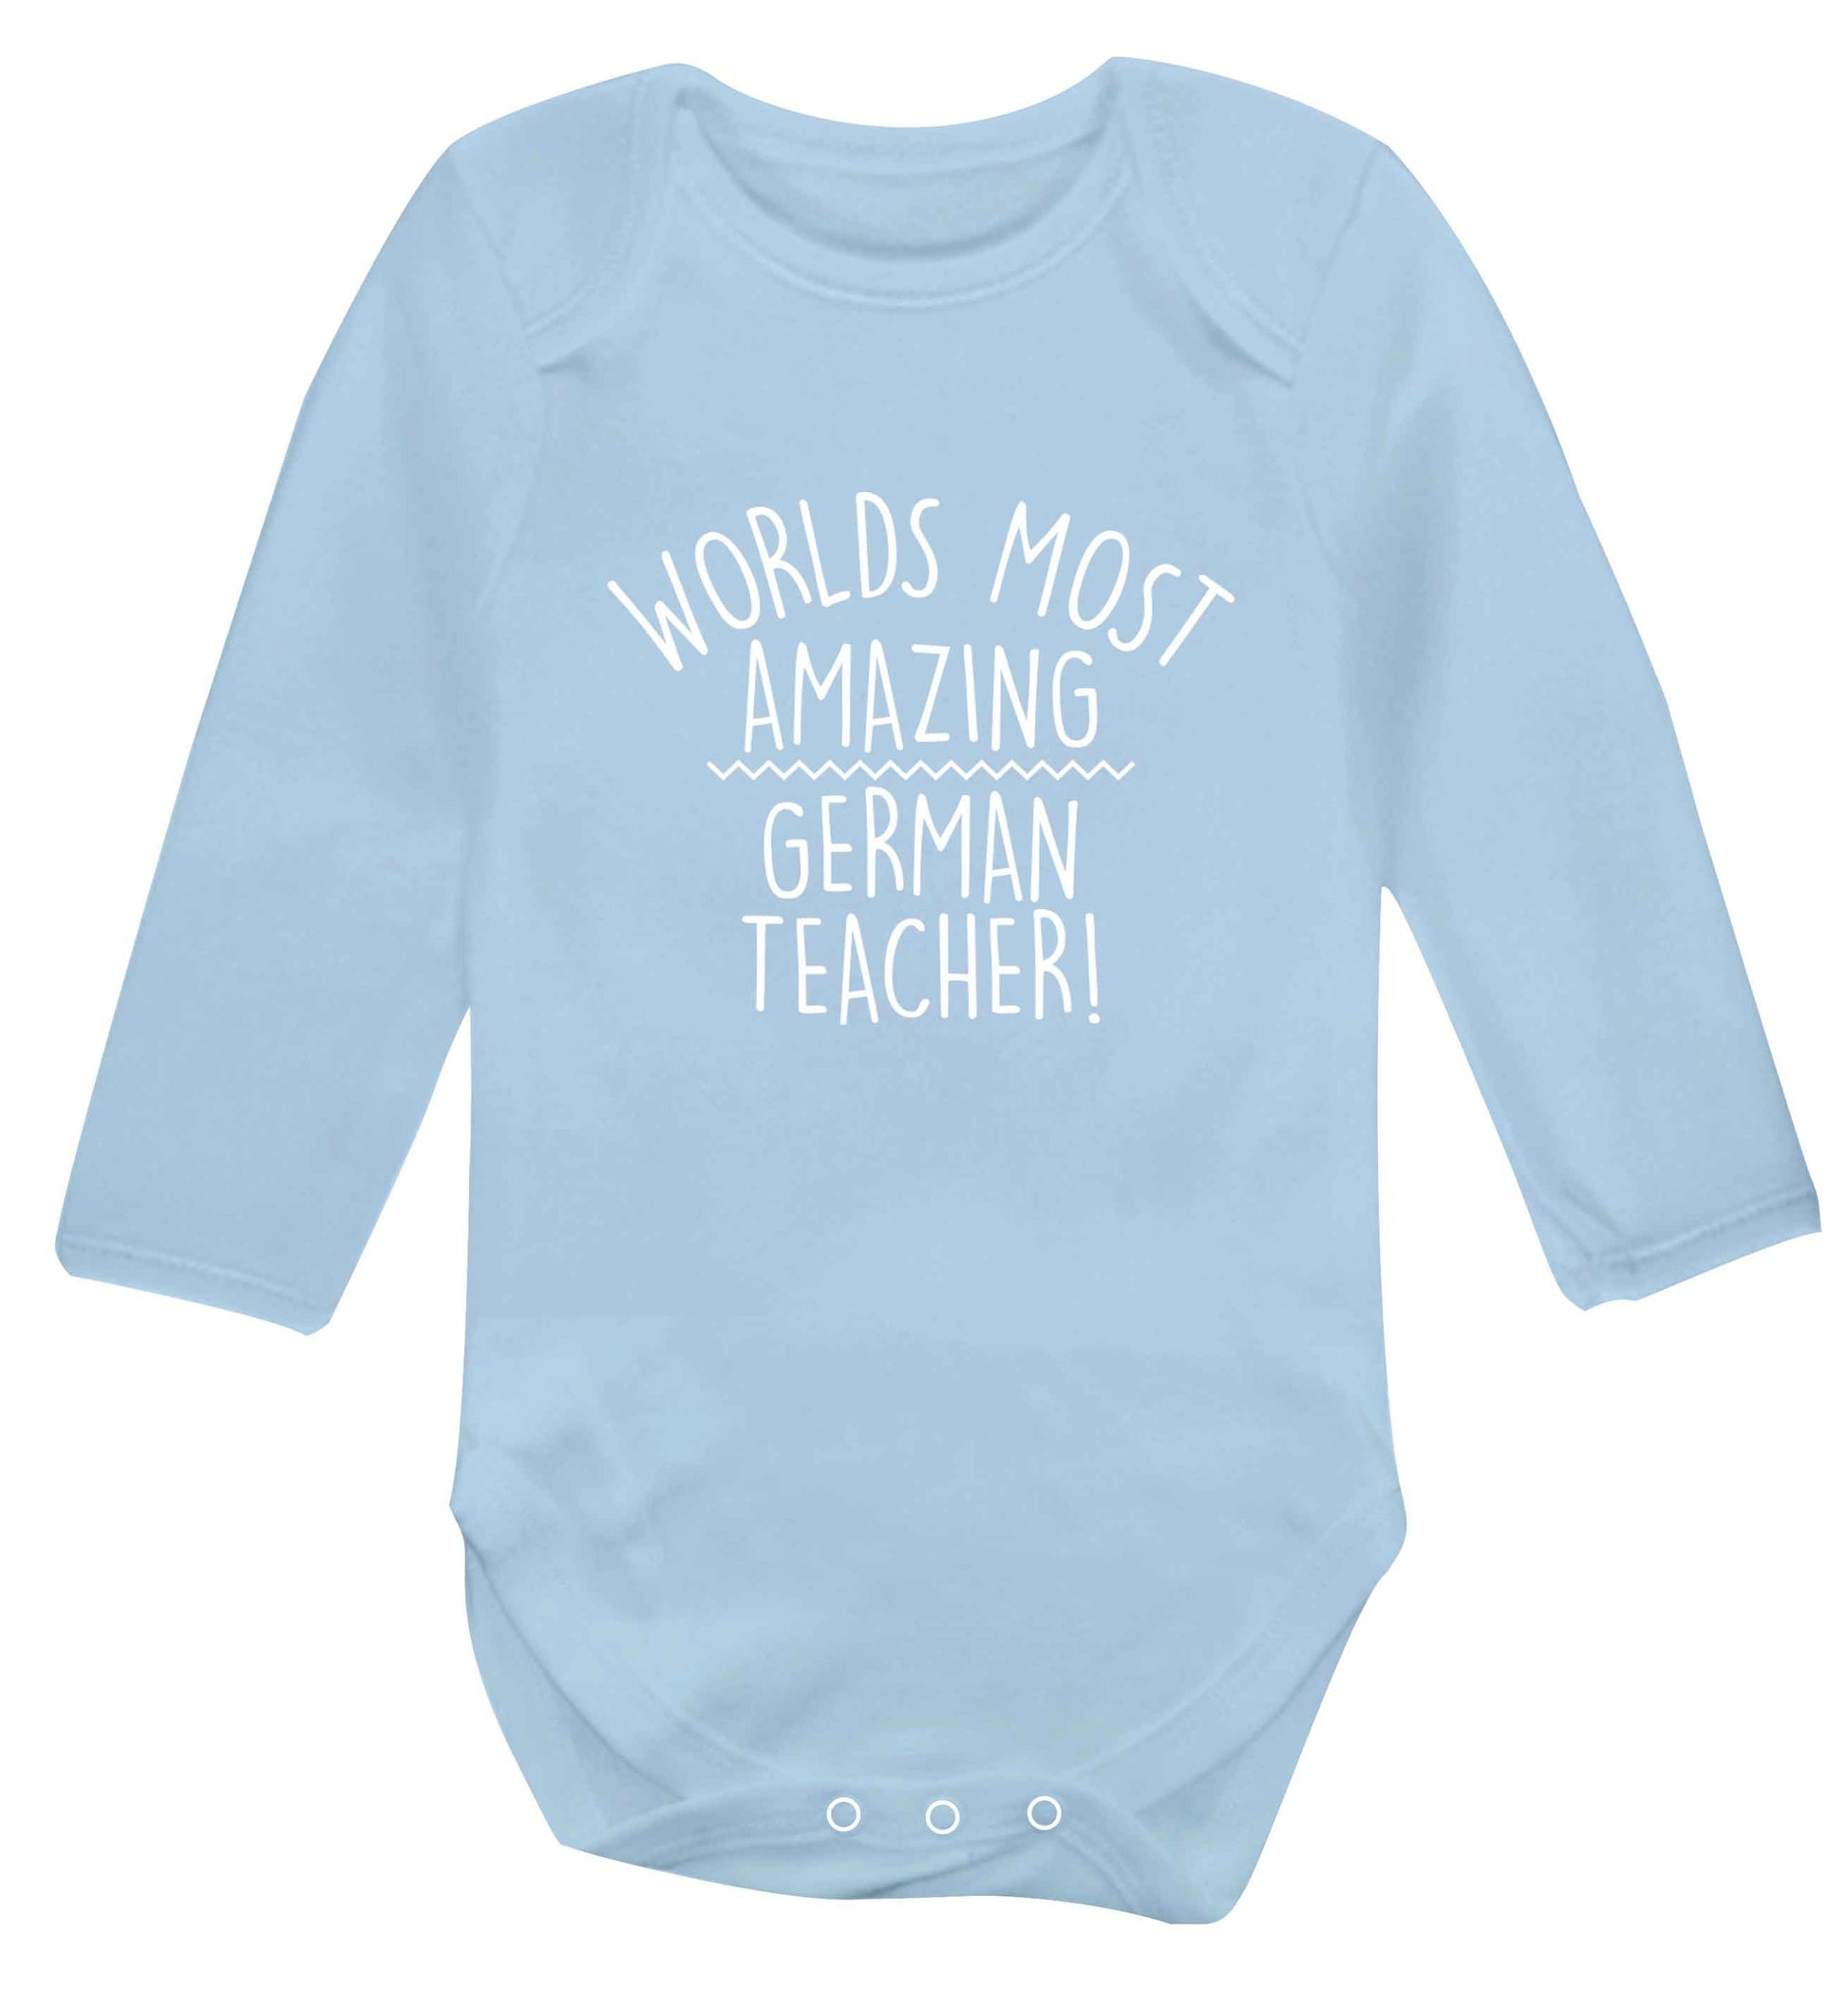 Worlds most amazing German teacher baby vest long sleeved pale blue 6-12 months